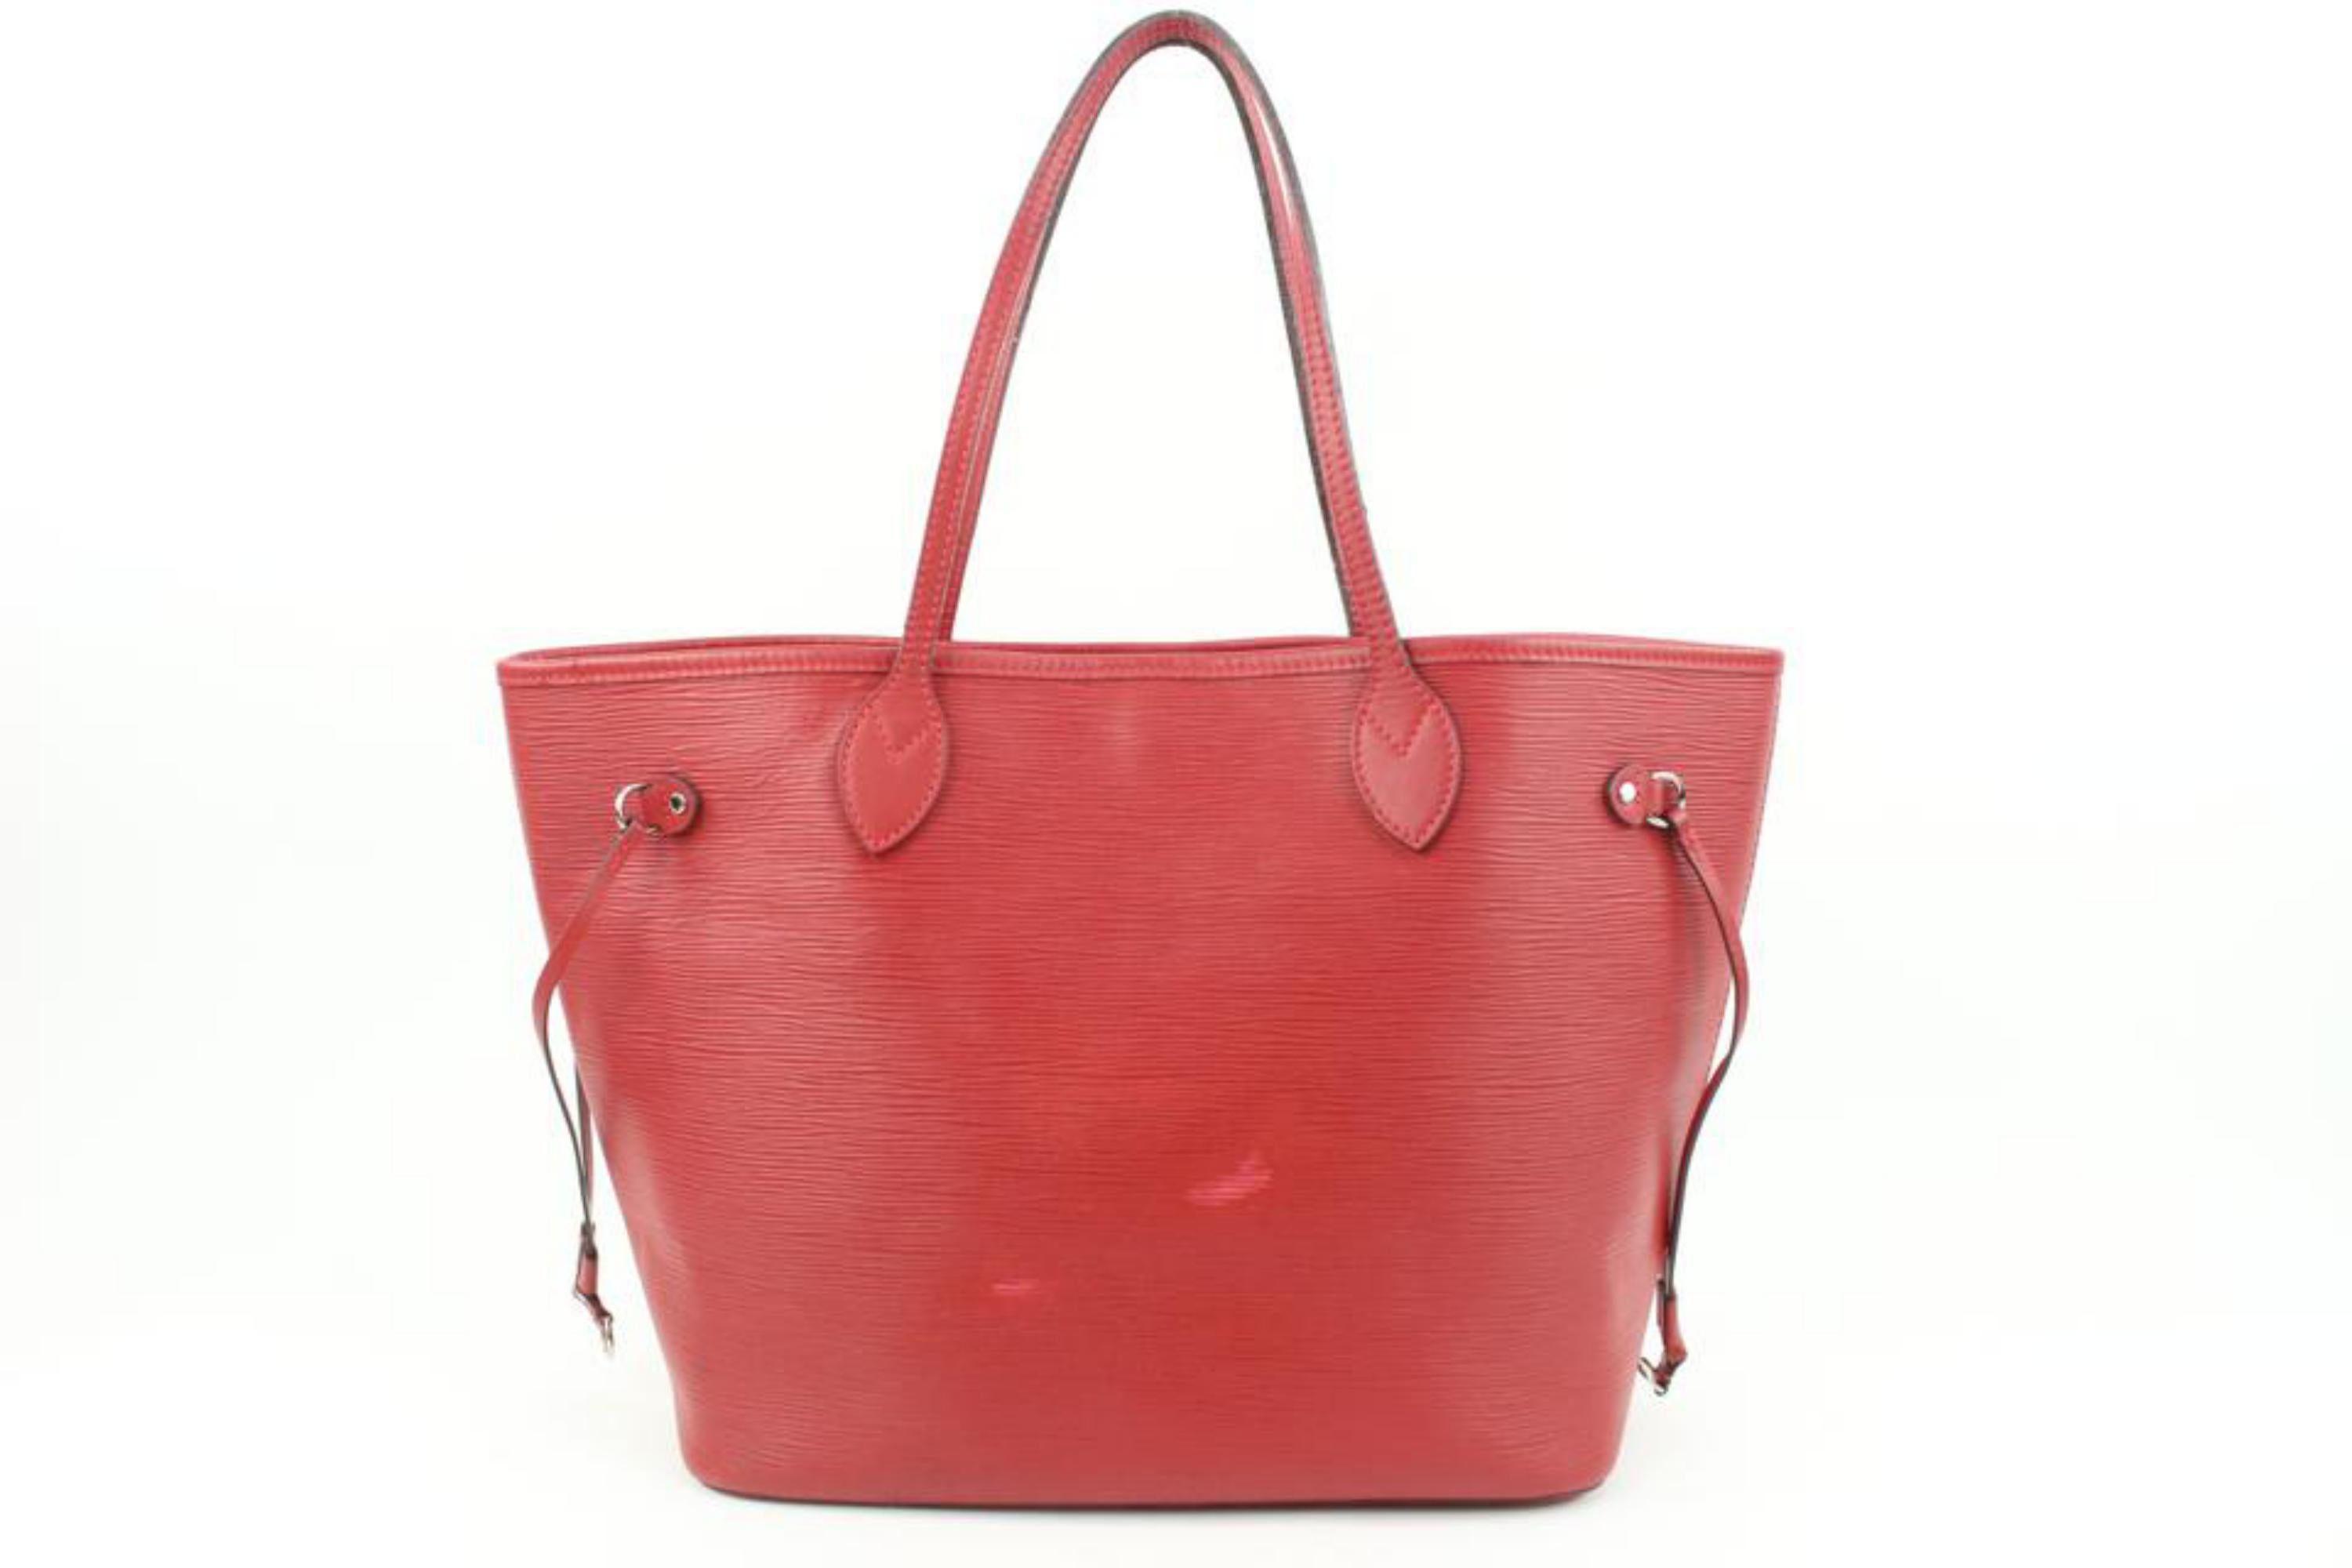 Louis Vuitton Red Epi Leather Neverfull MM Tote Bag 121lv49 For Sale 2